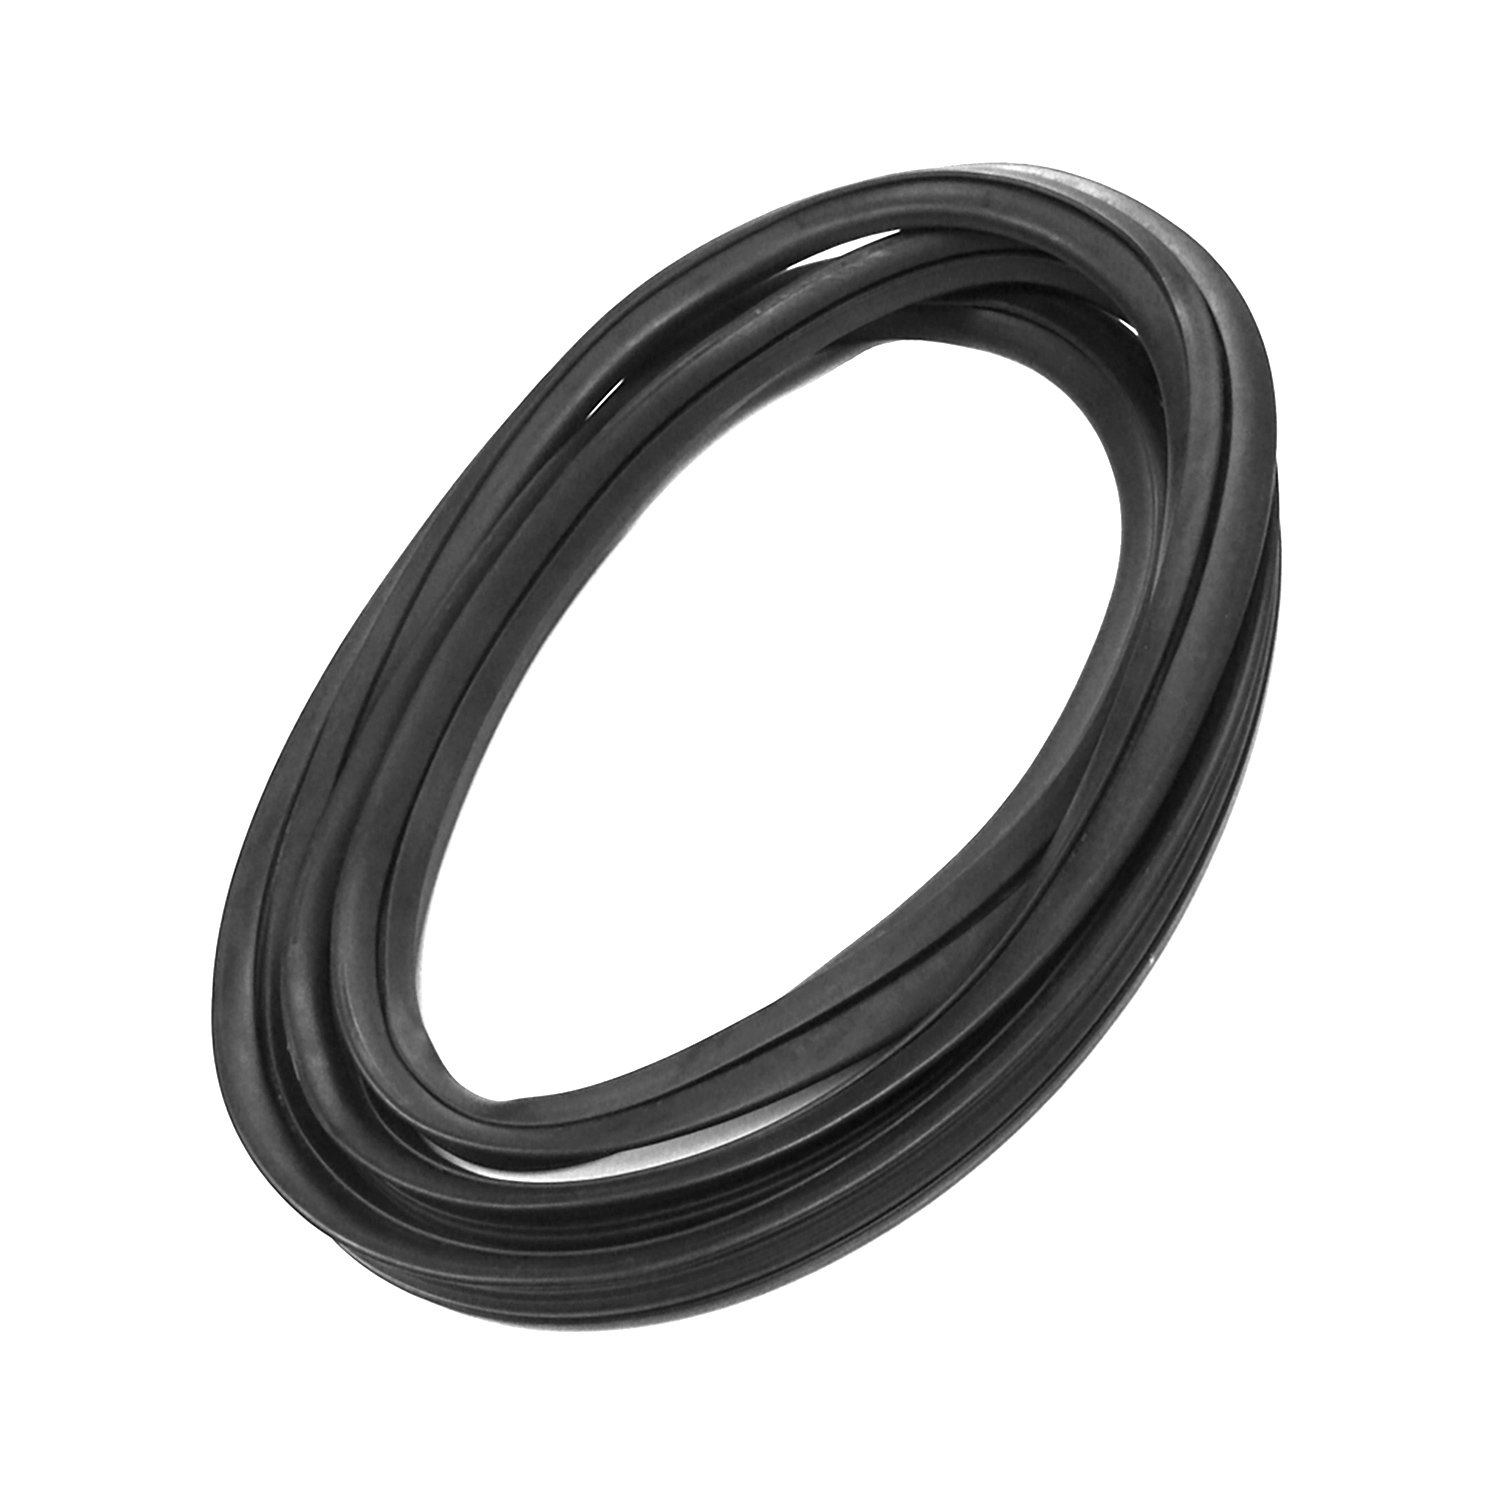 1976 Chevrolet G30 Windshield Seal, 71-80 GM Full Size Van With Trim Groove, Each-VWS 7324-A